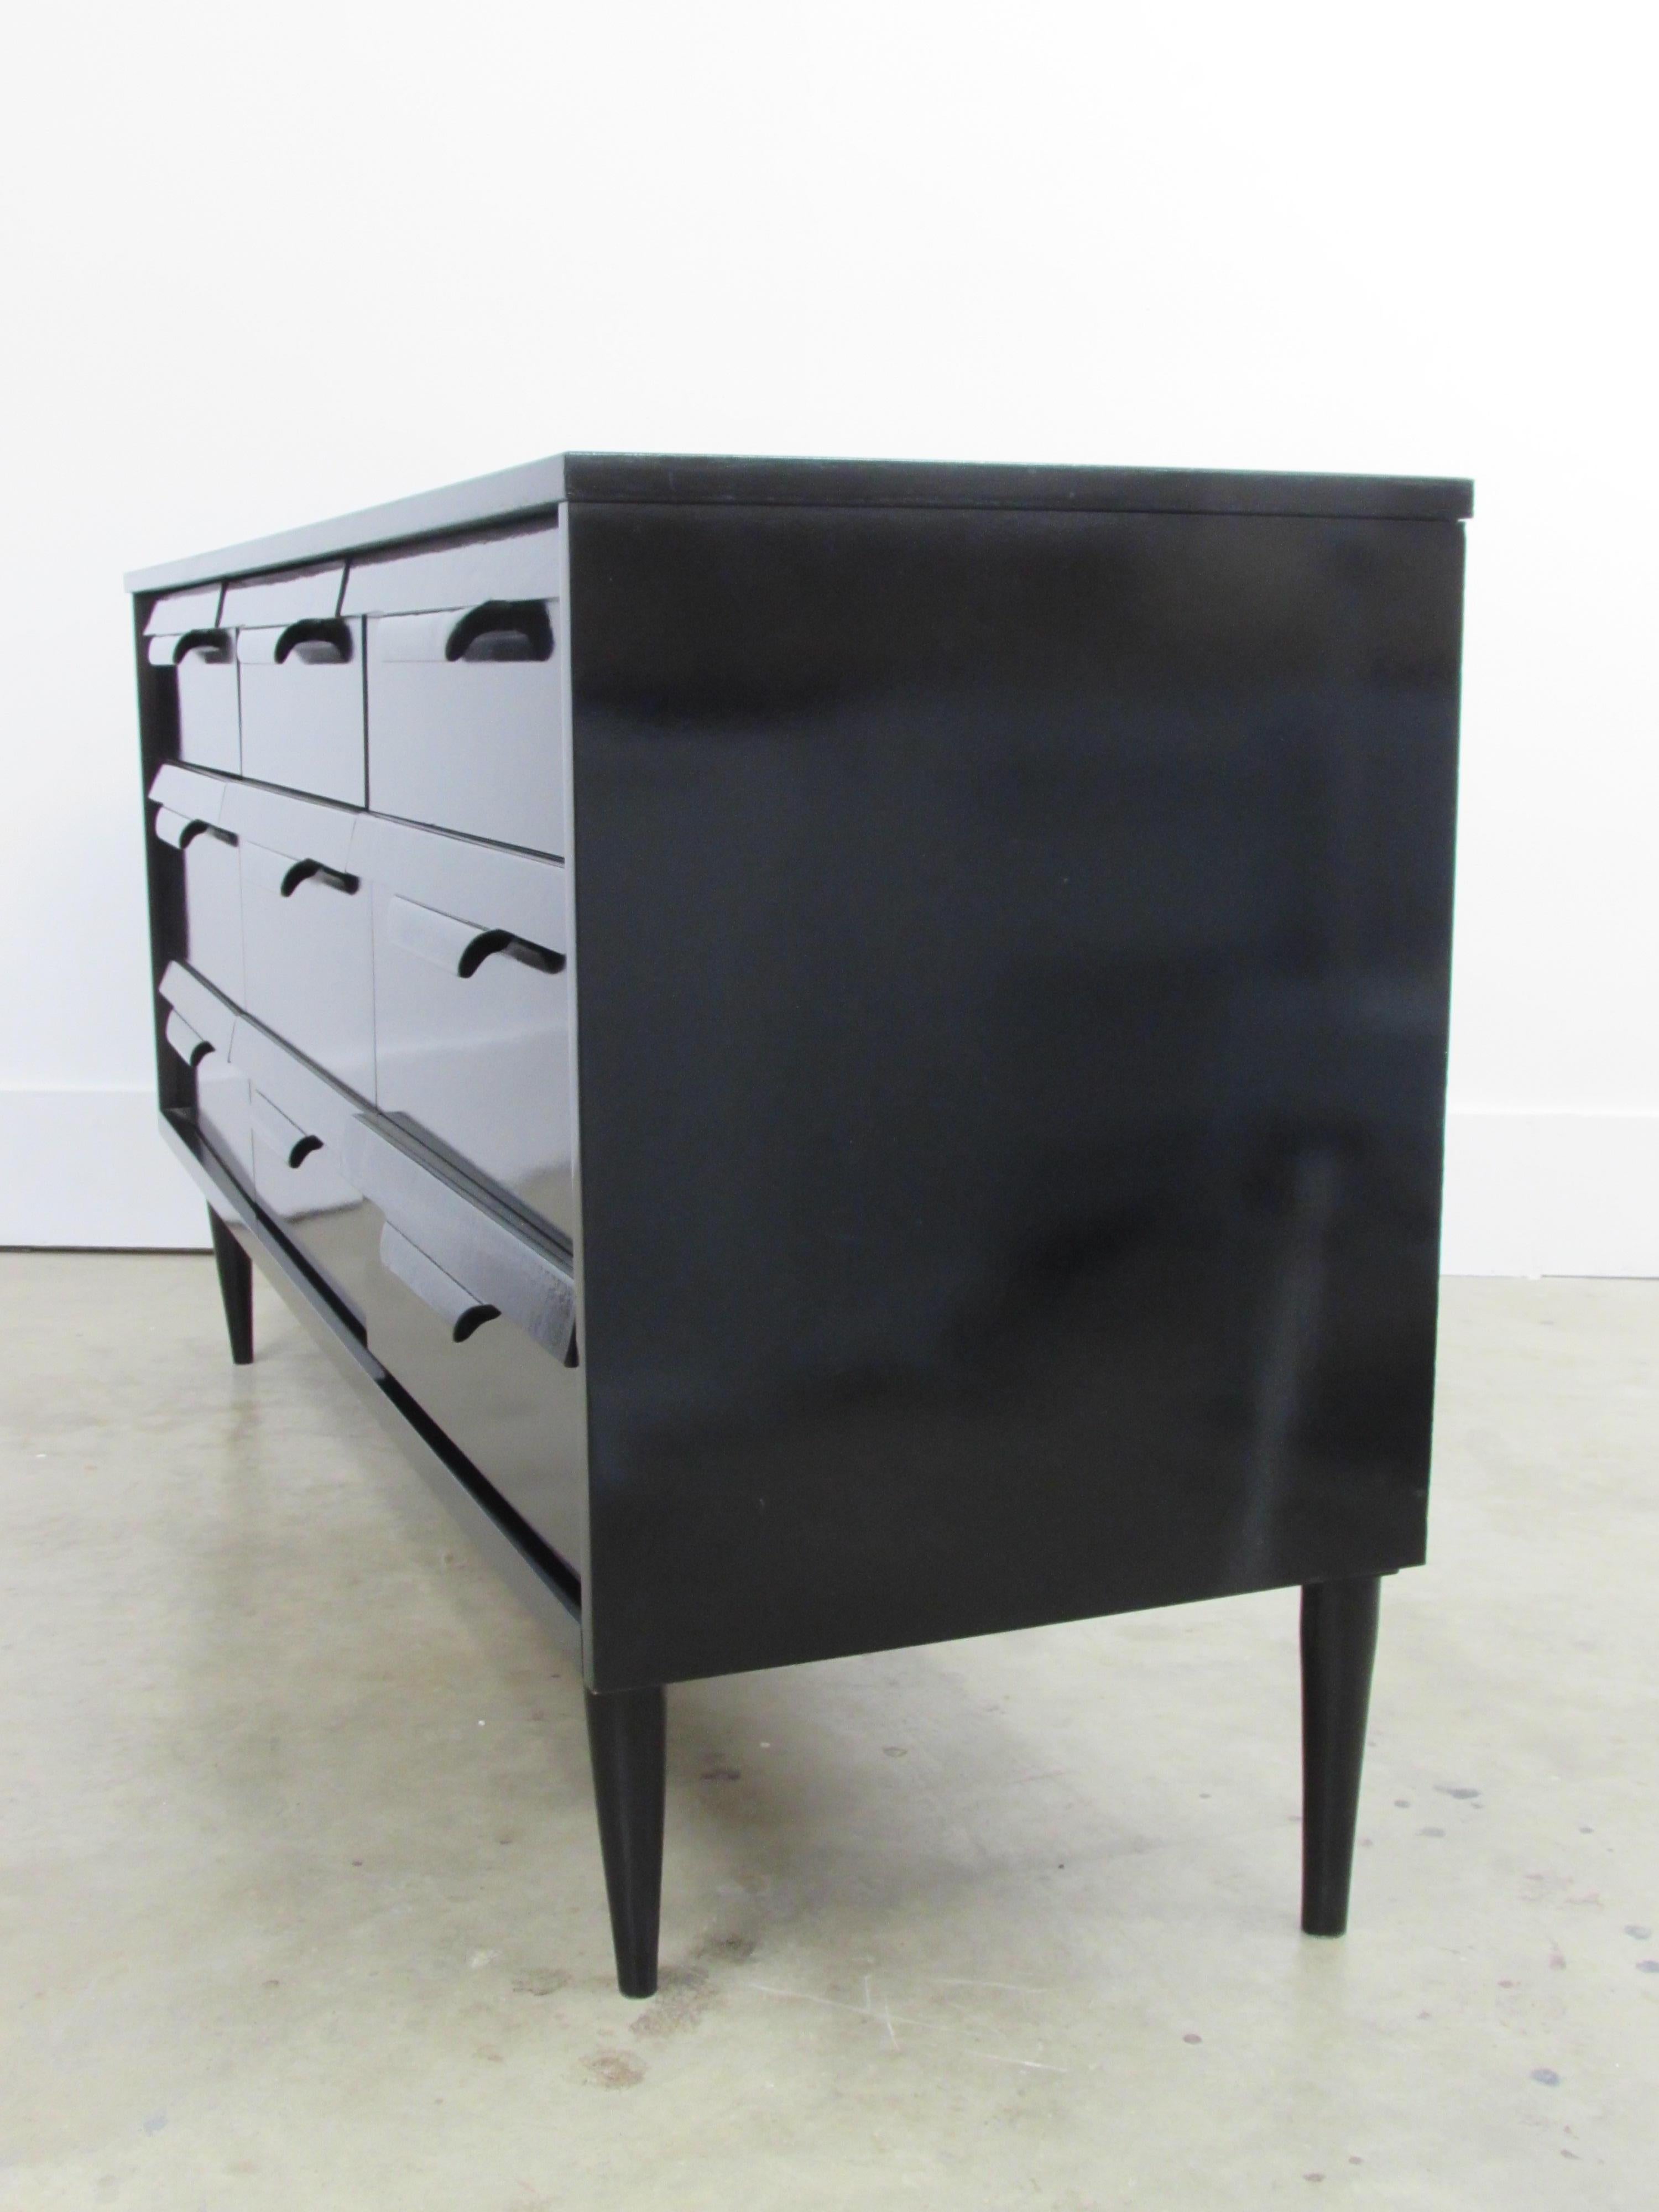 Bassett Credenza in Black Lacquer on Stiletto Legs In Excellent Condition For Sale In Raleigh, NC